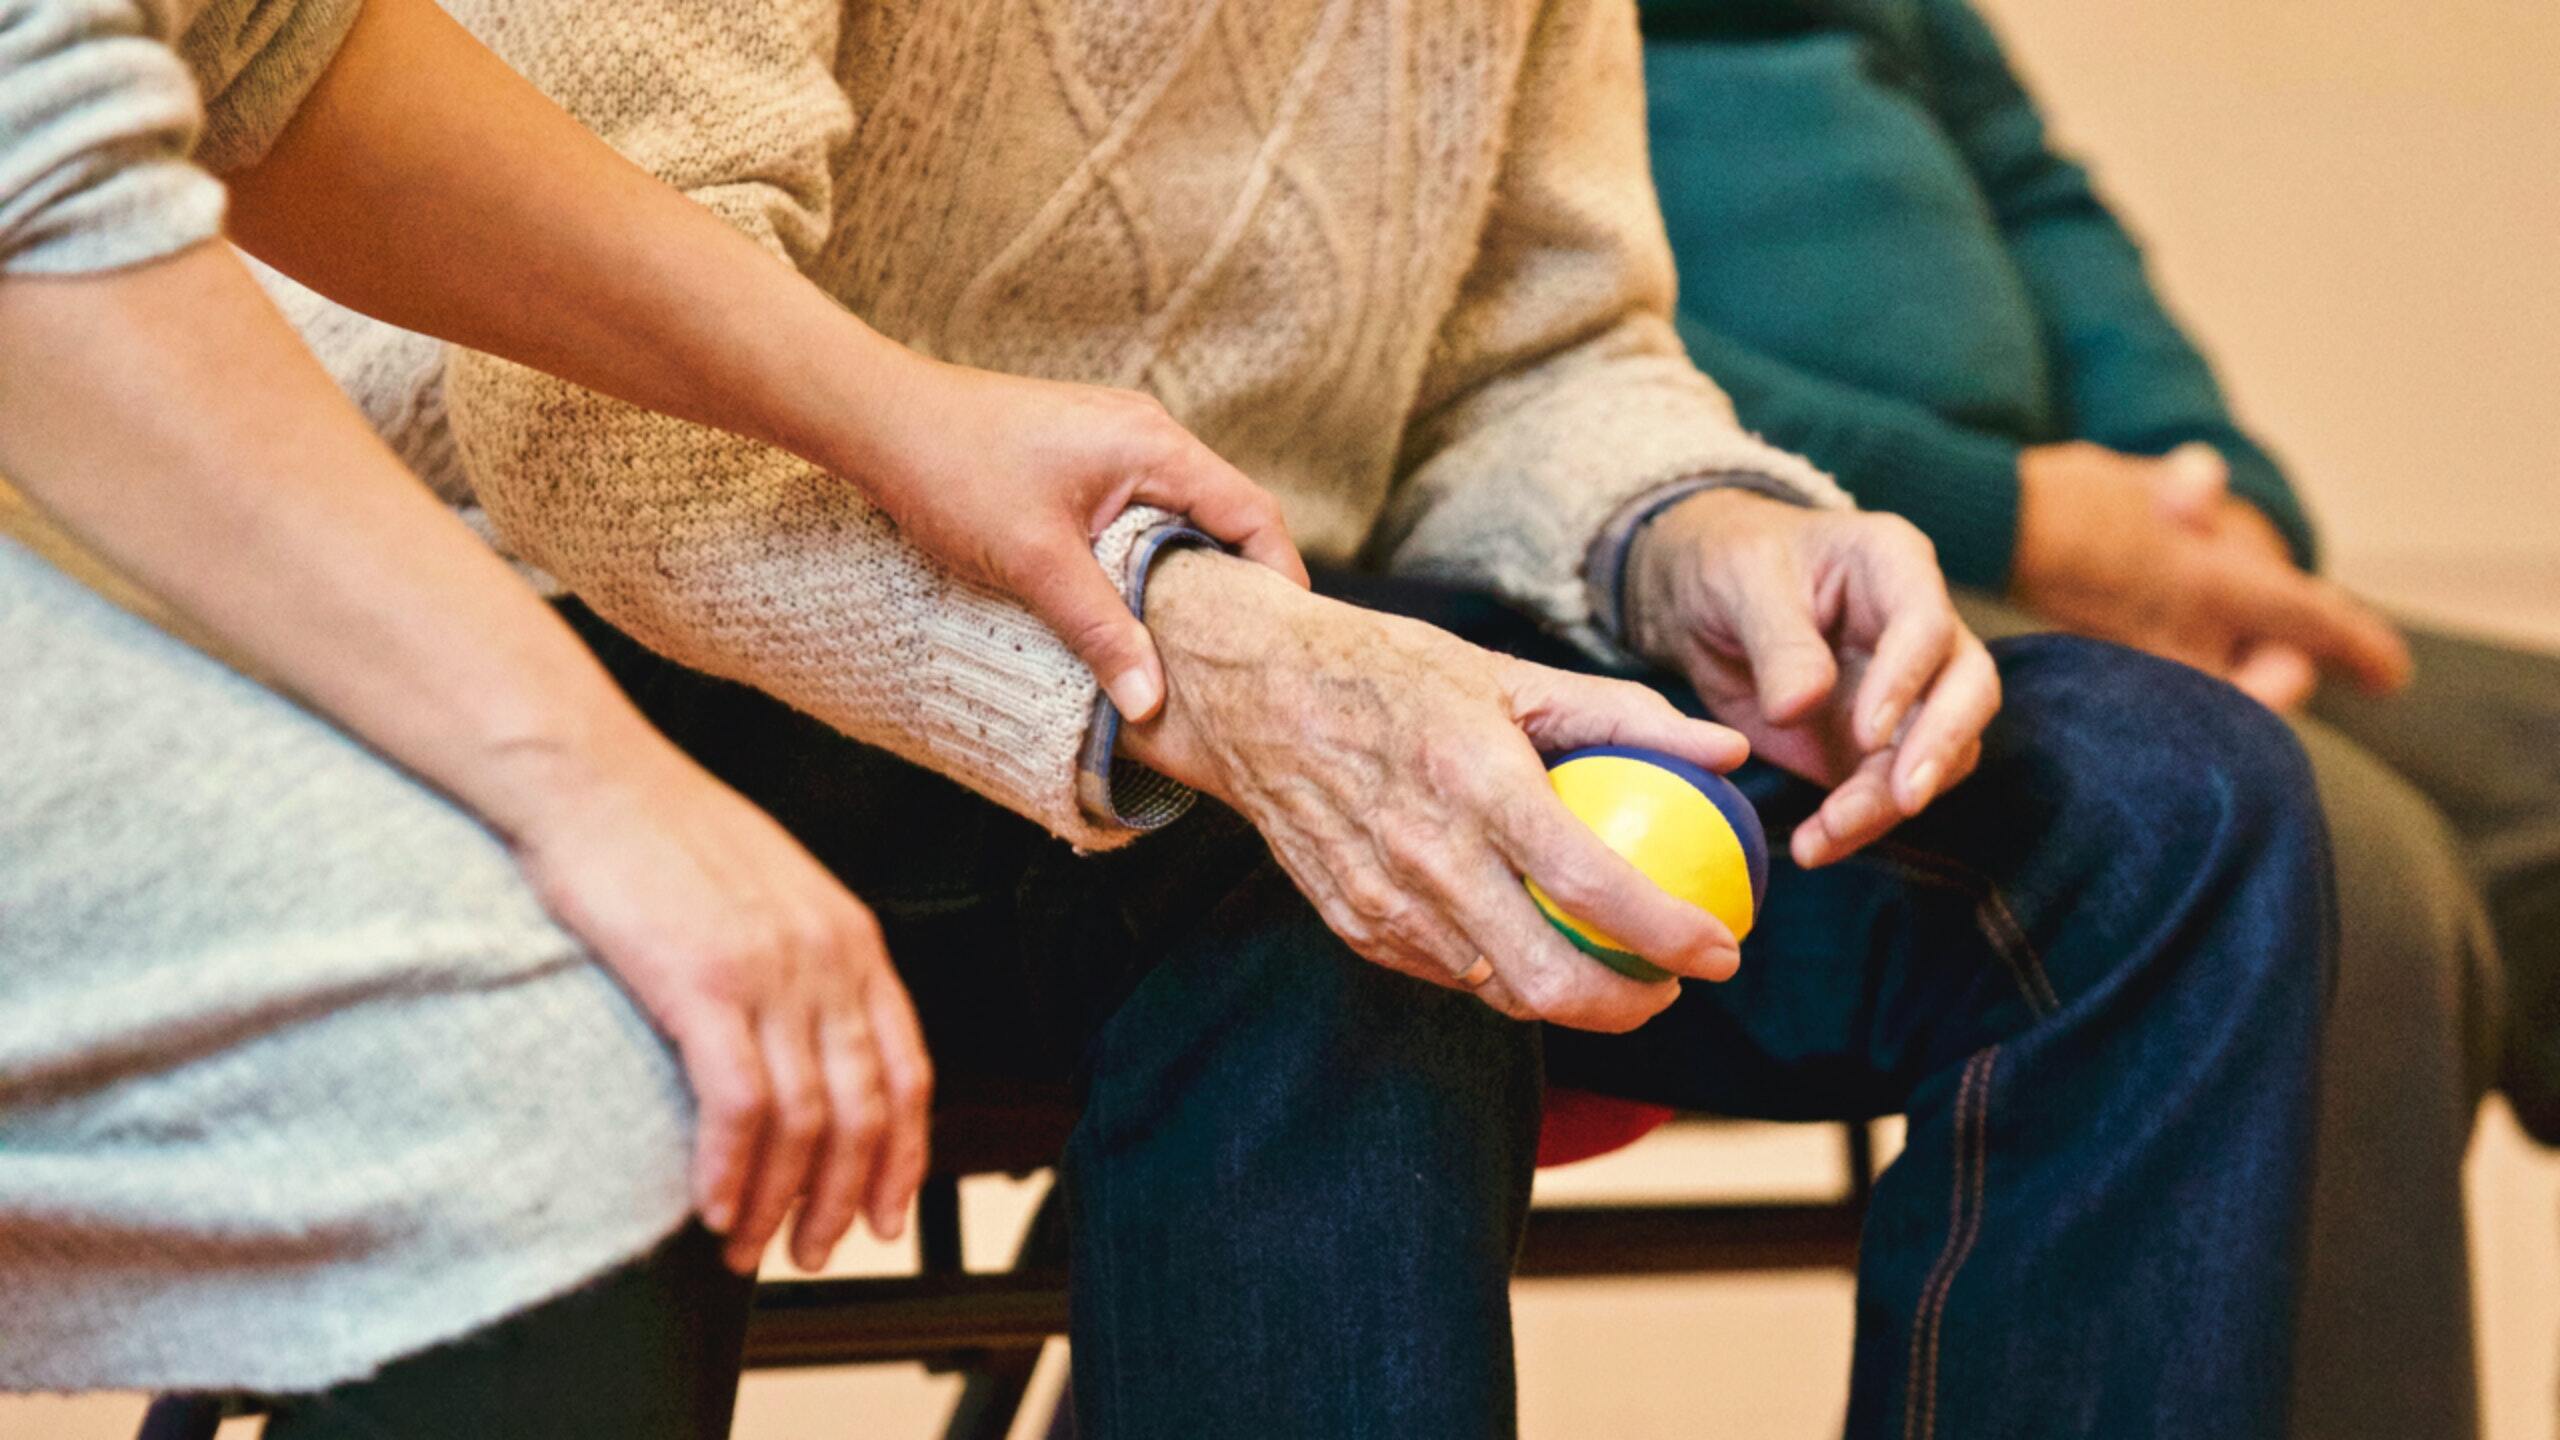 A hand holding on to the arm of an older person who is holding a ball